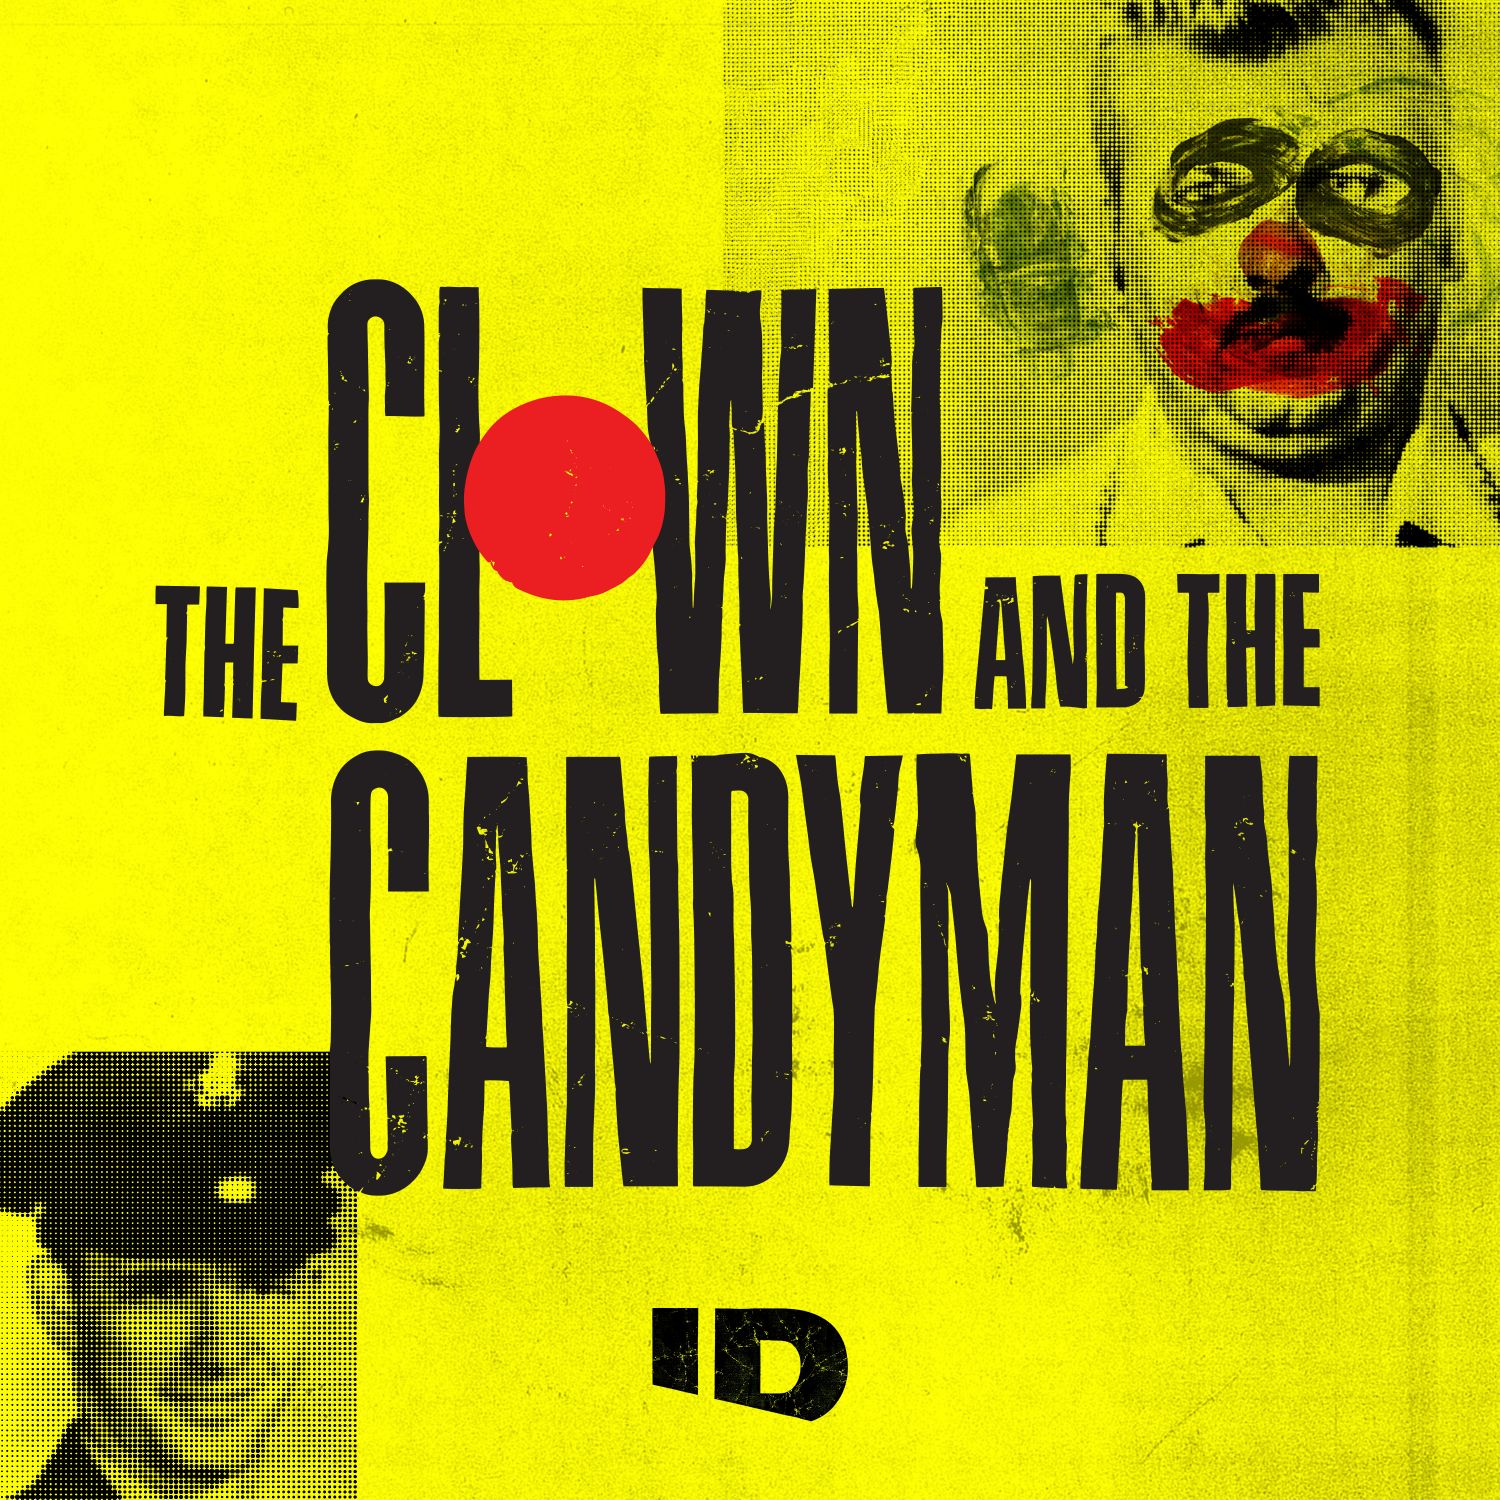 Ep 1 “the Candyman” The Inside Story Of Dean Corll The Clown And